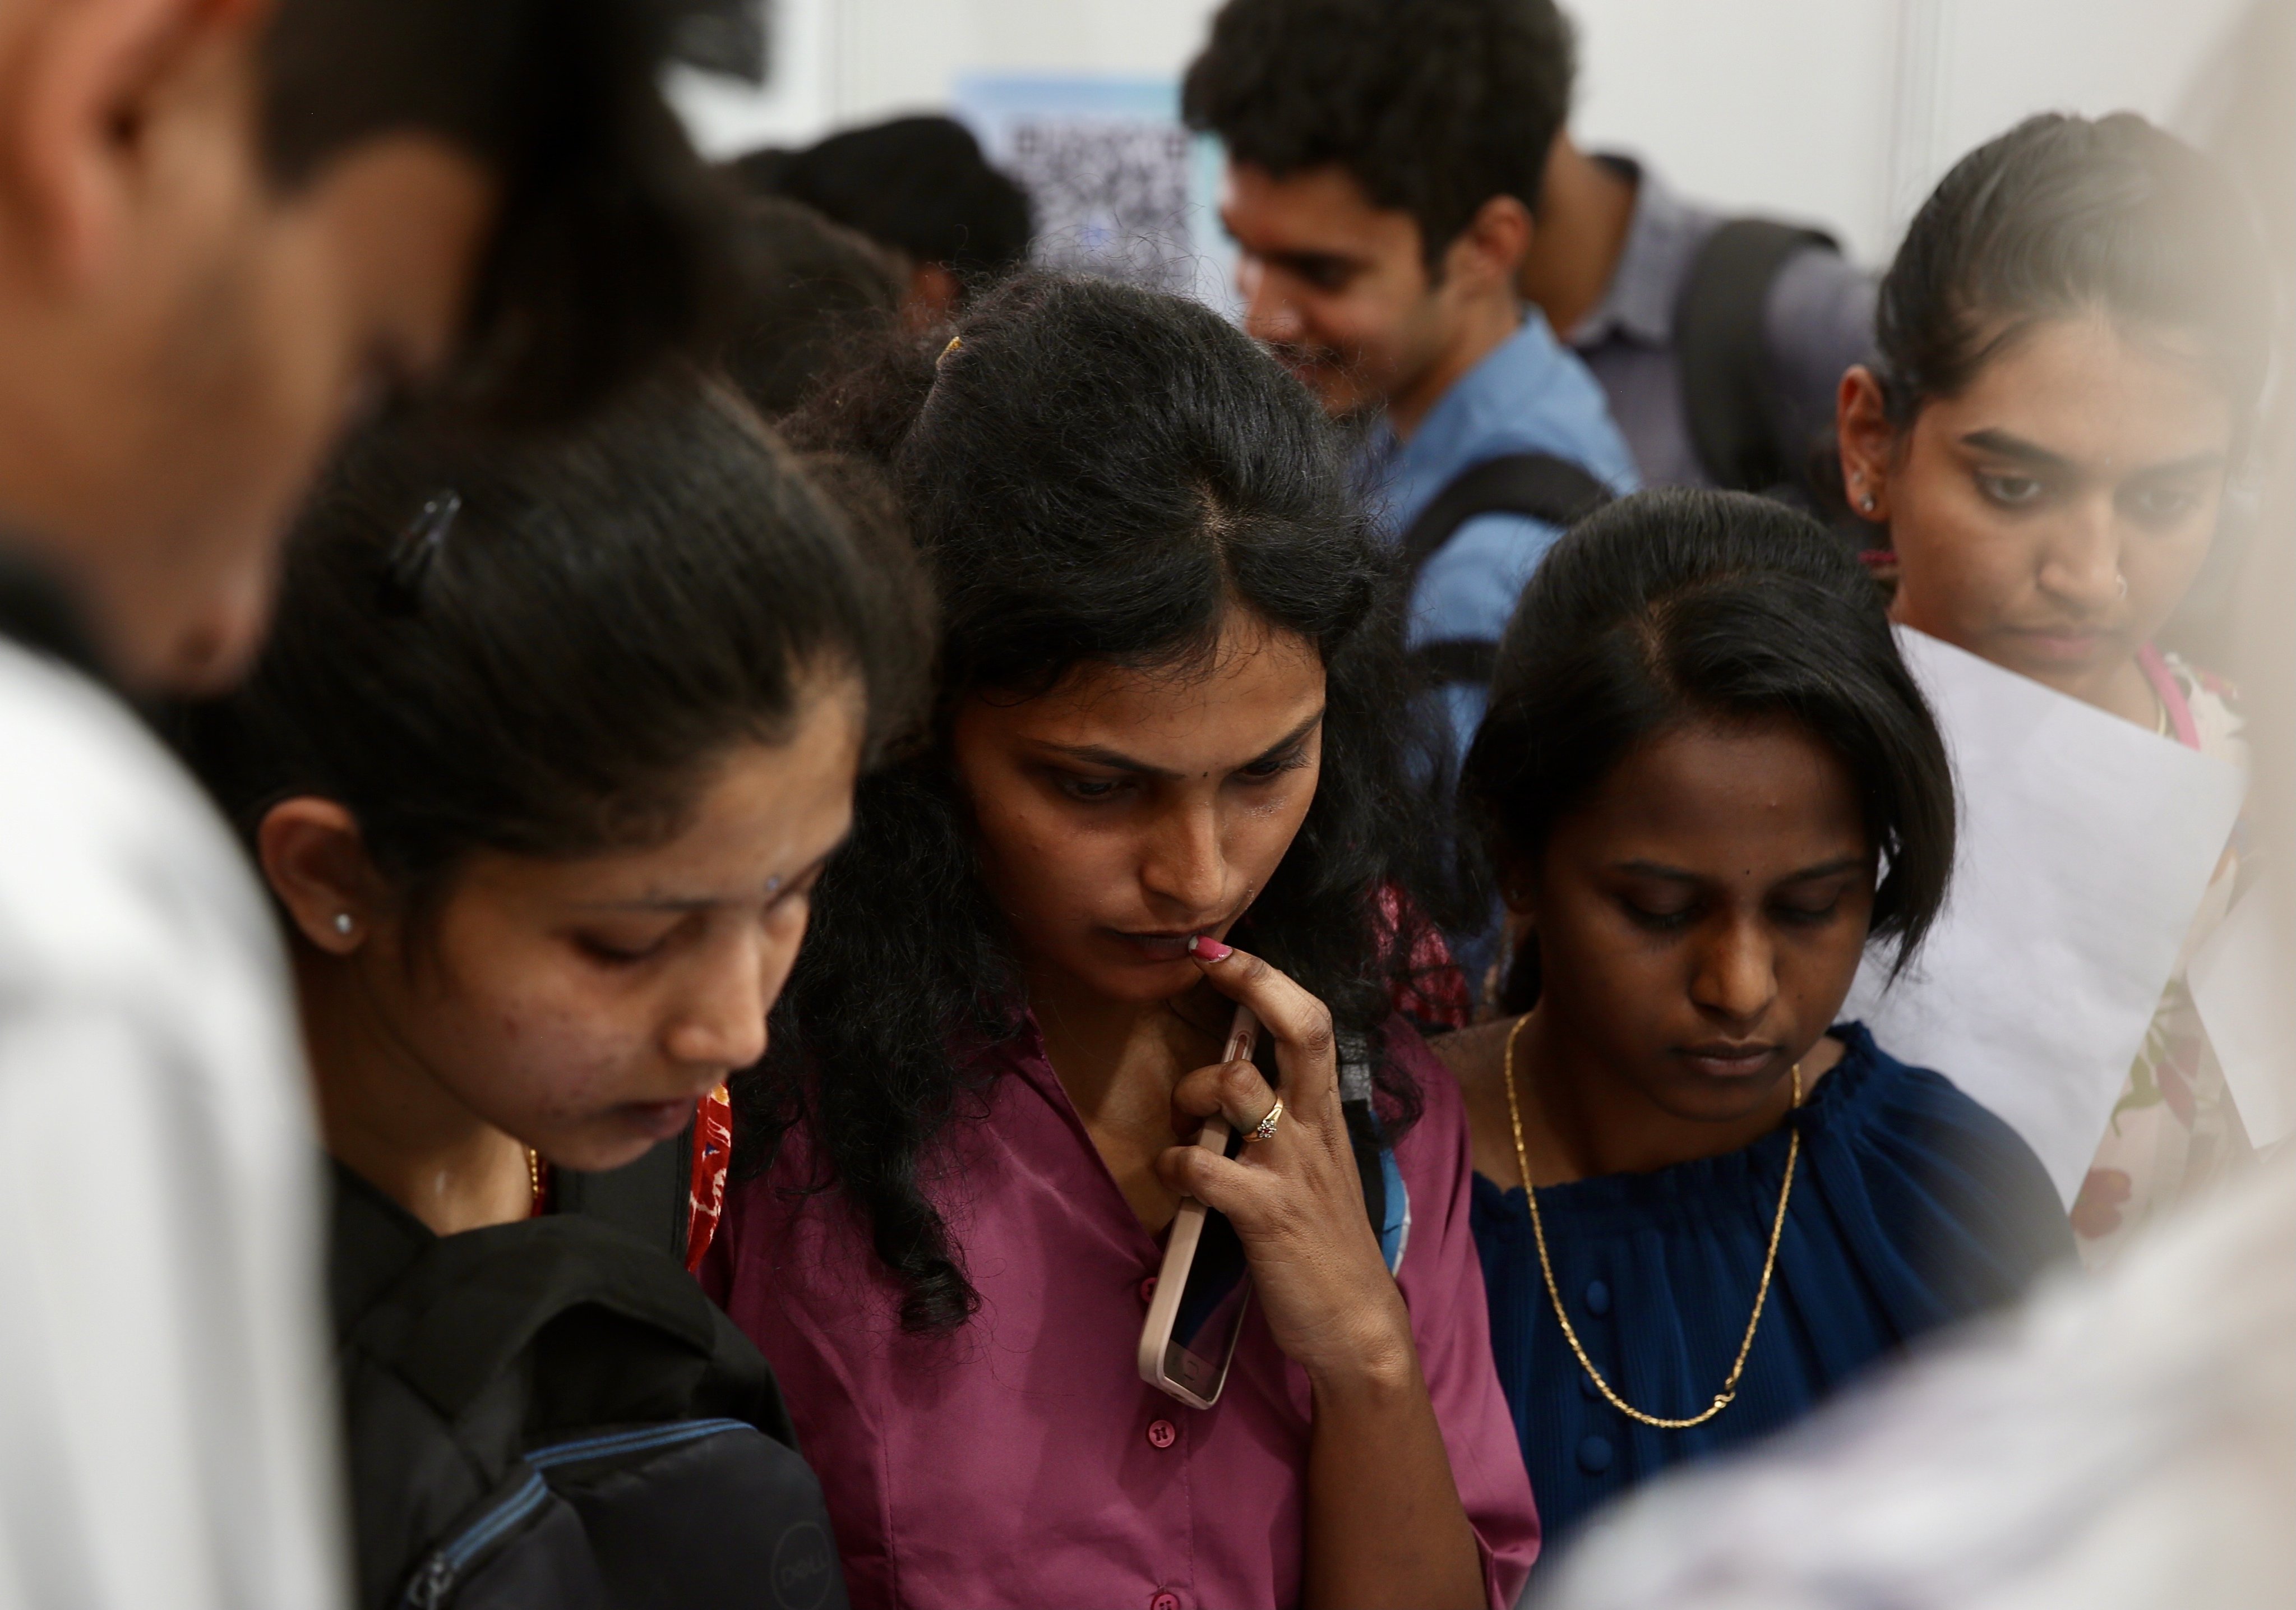 Job seekers gather at a mega job fair on February 27, organised by the Karnataka state government in Bengaluru, India, where 600 companies are looking to hire at least 50,000 people. Photo: EPA-EFE